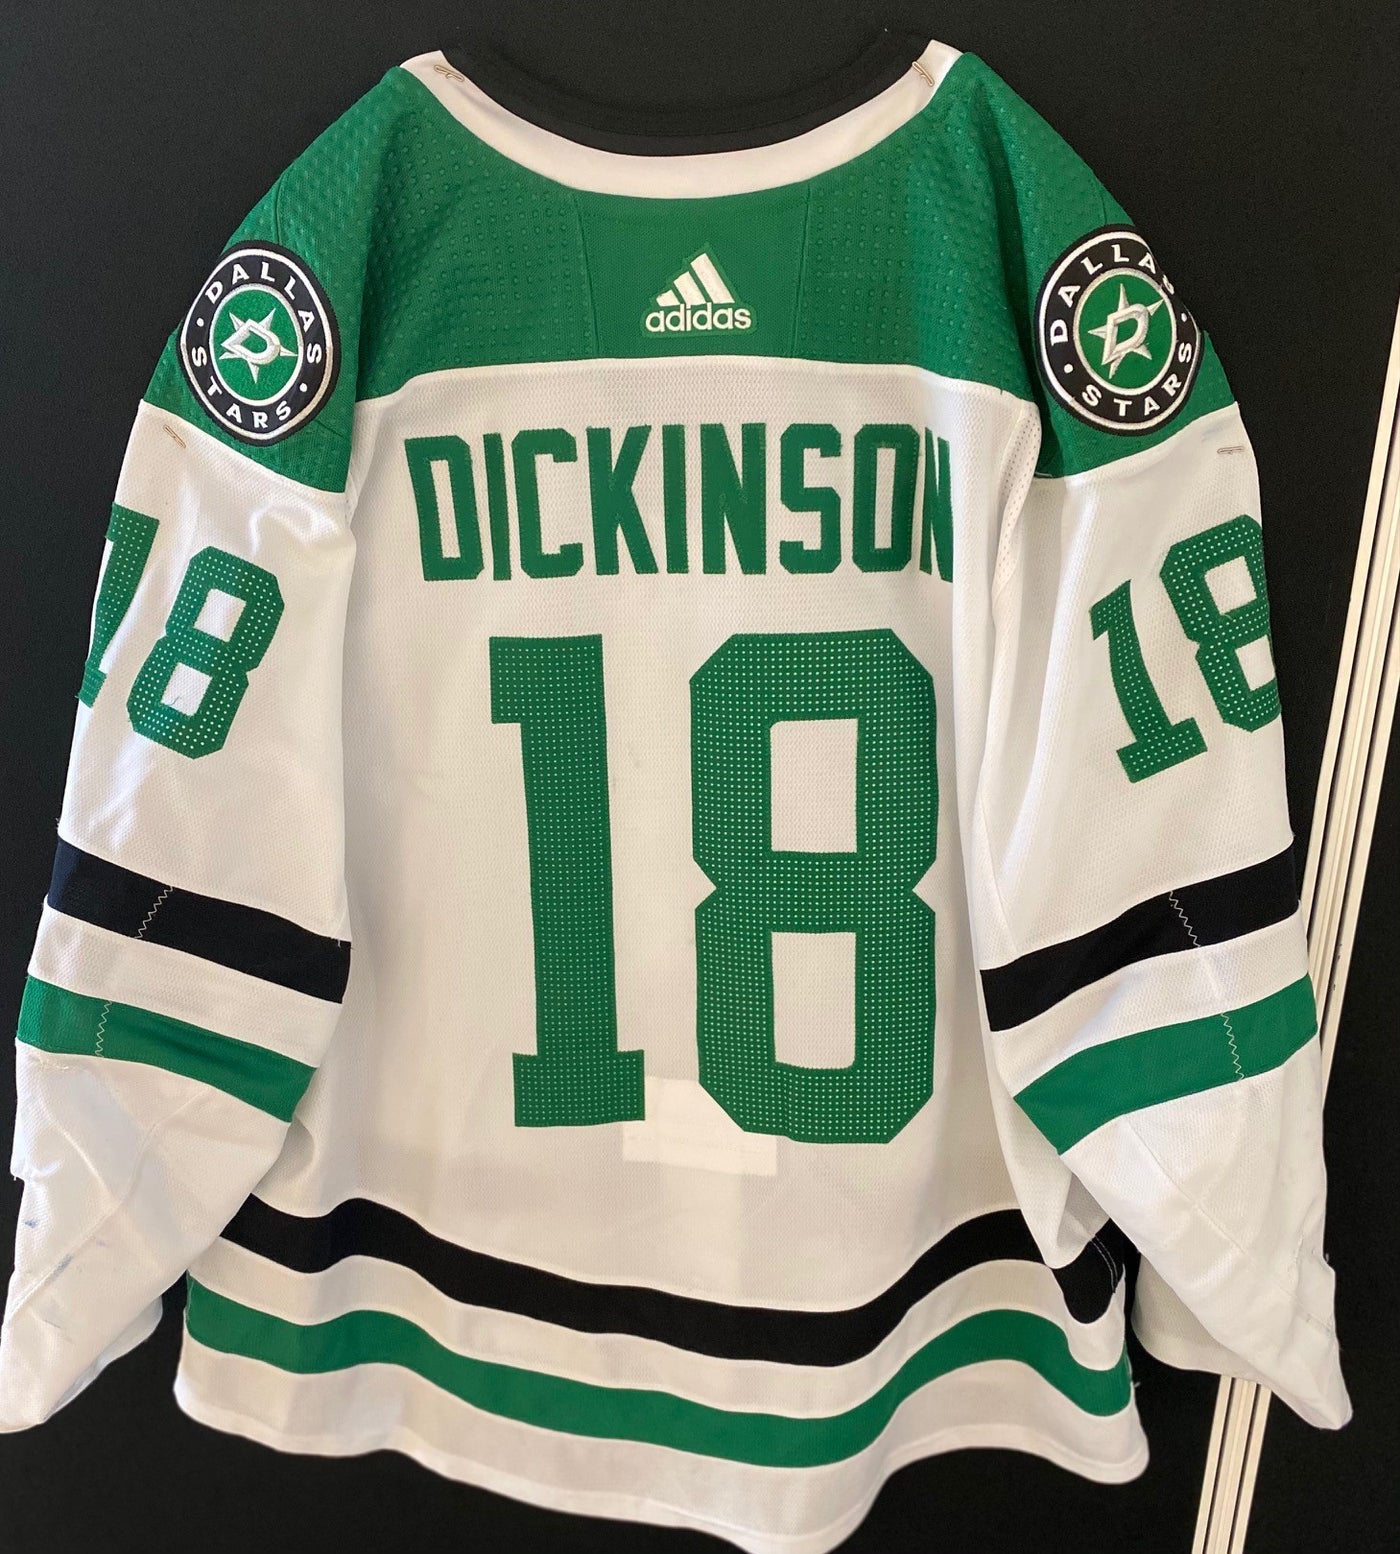 Jason Dickinson 20/21 Away Set 1 Game Worn Jersey in Green and White - Back View